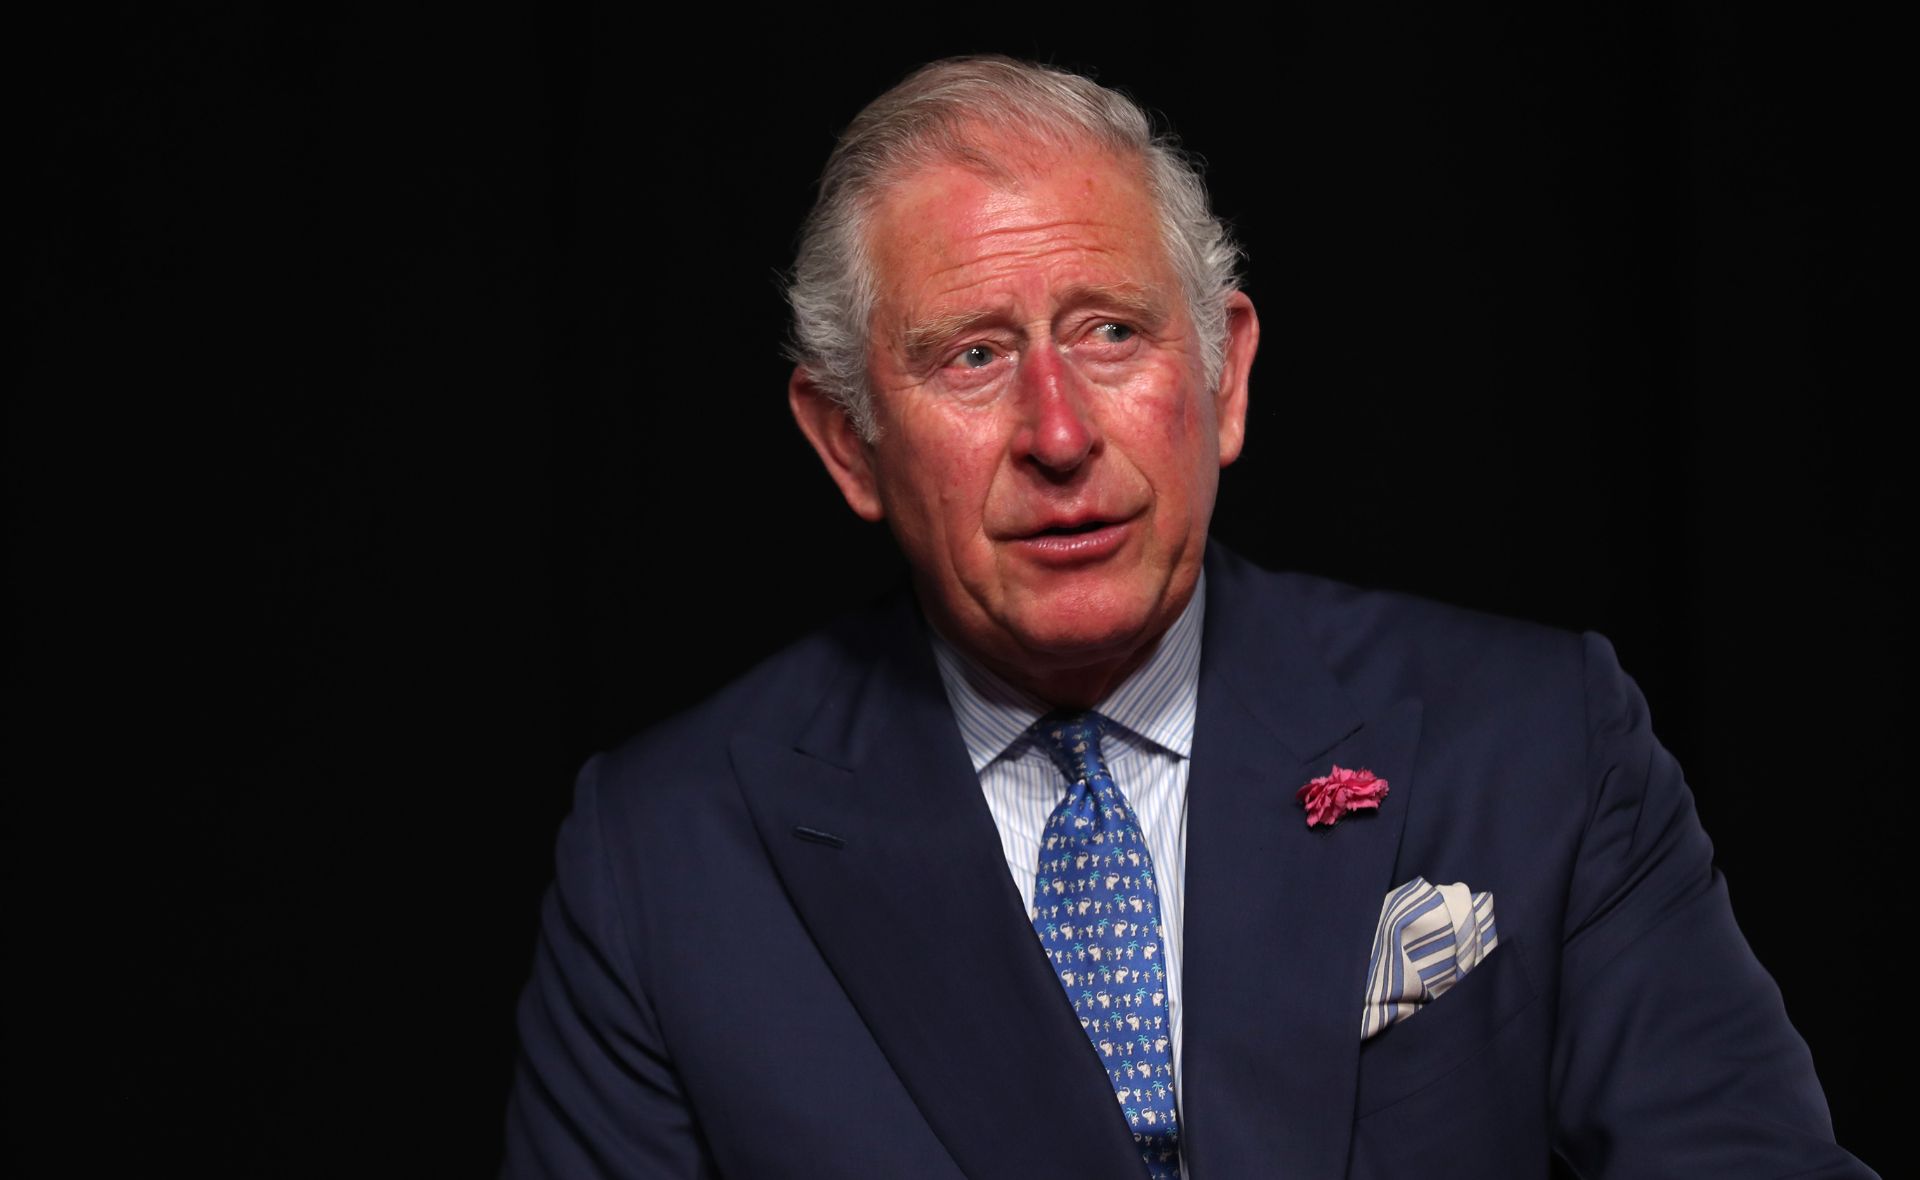 The Reserve Bank set to feature King Charles III on Australian Currency